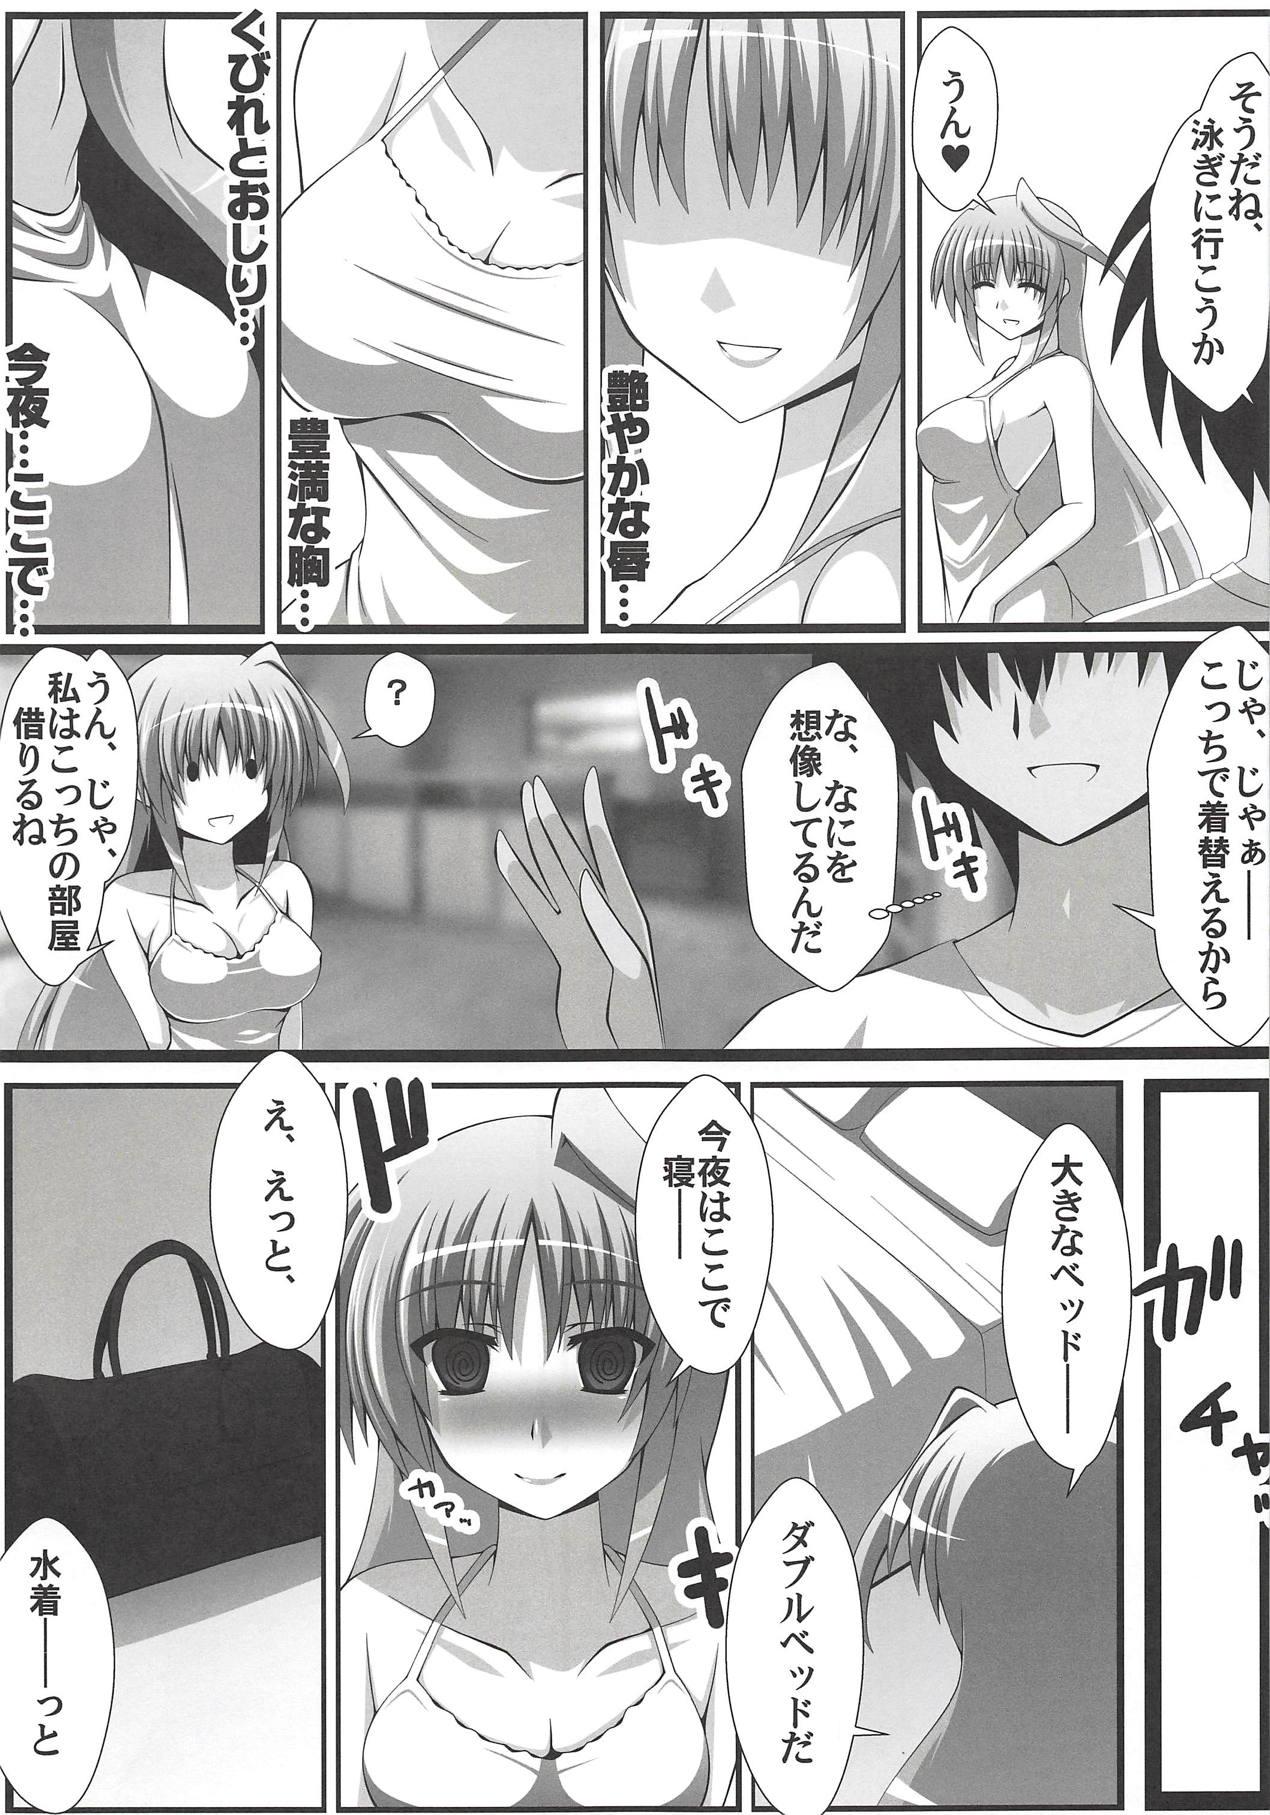 Pigtails Eins to Physical Unison - Mahou shoujo lyrical nanoha Porn - Page 6